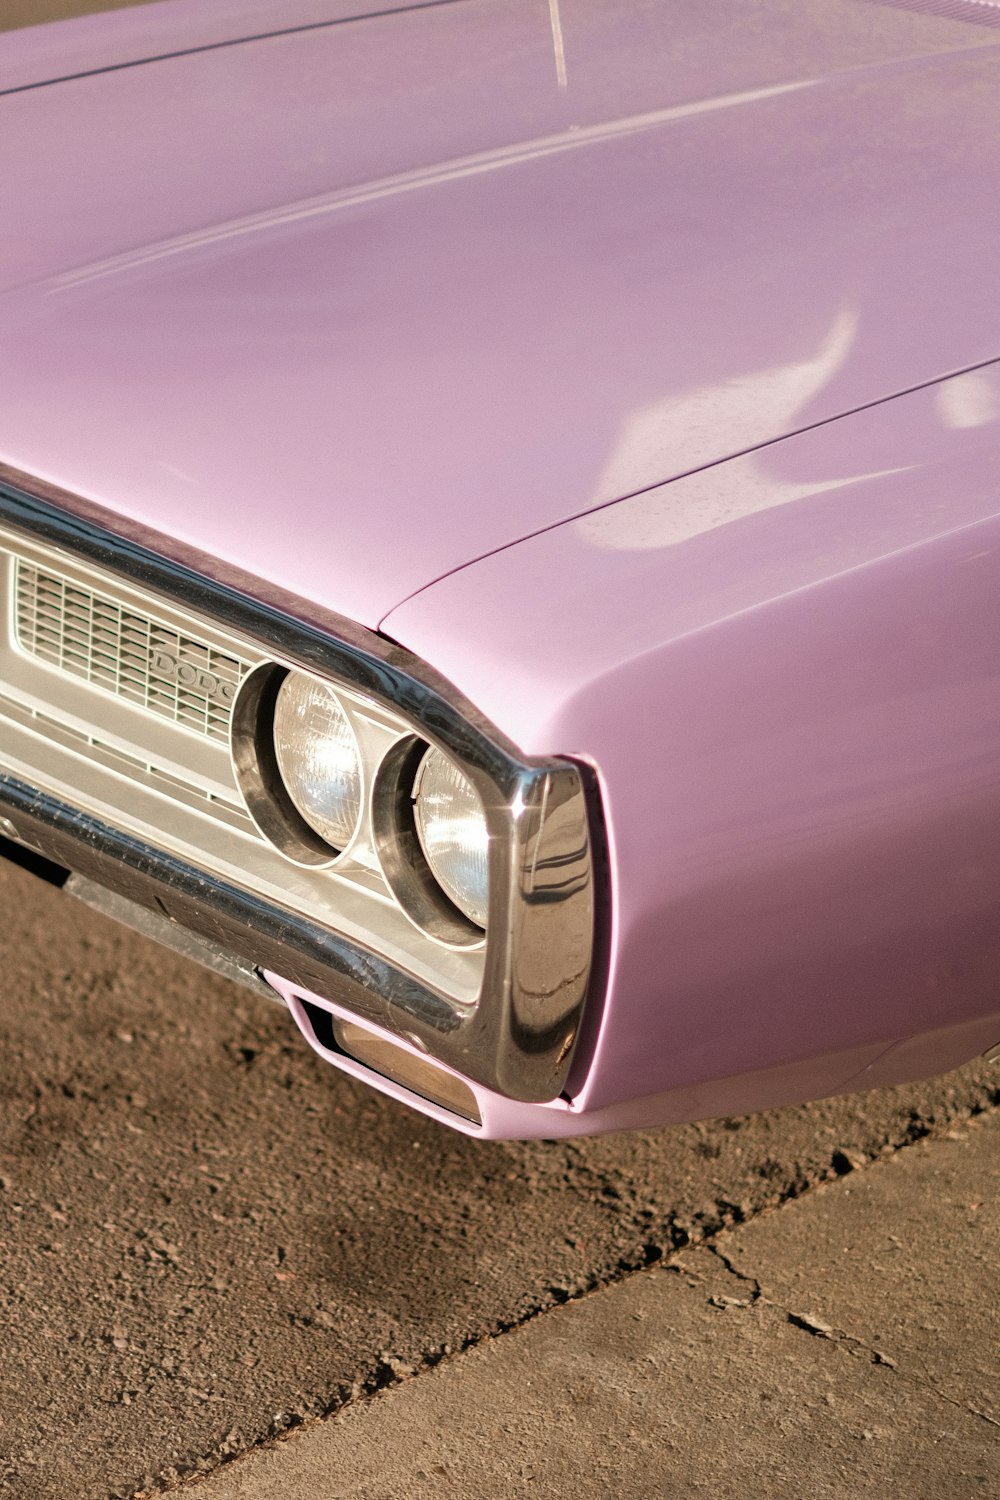 a close up of the front end of a purple car